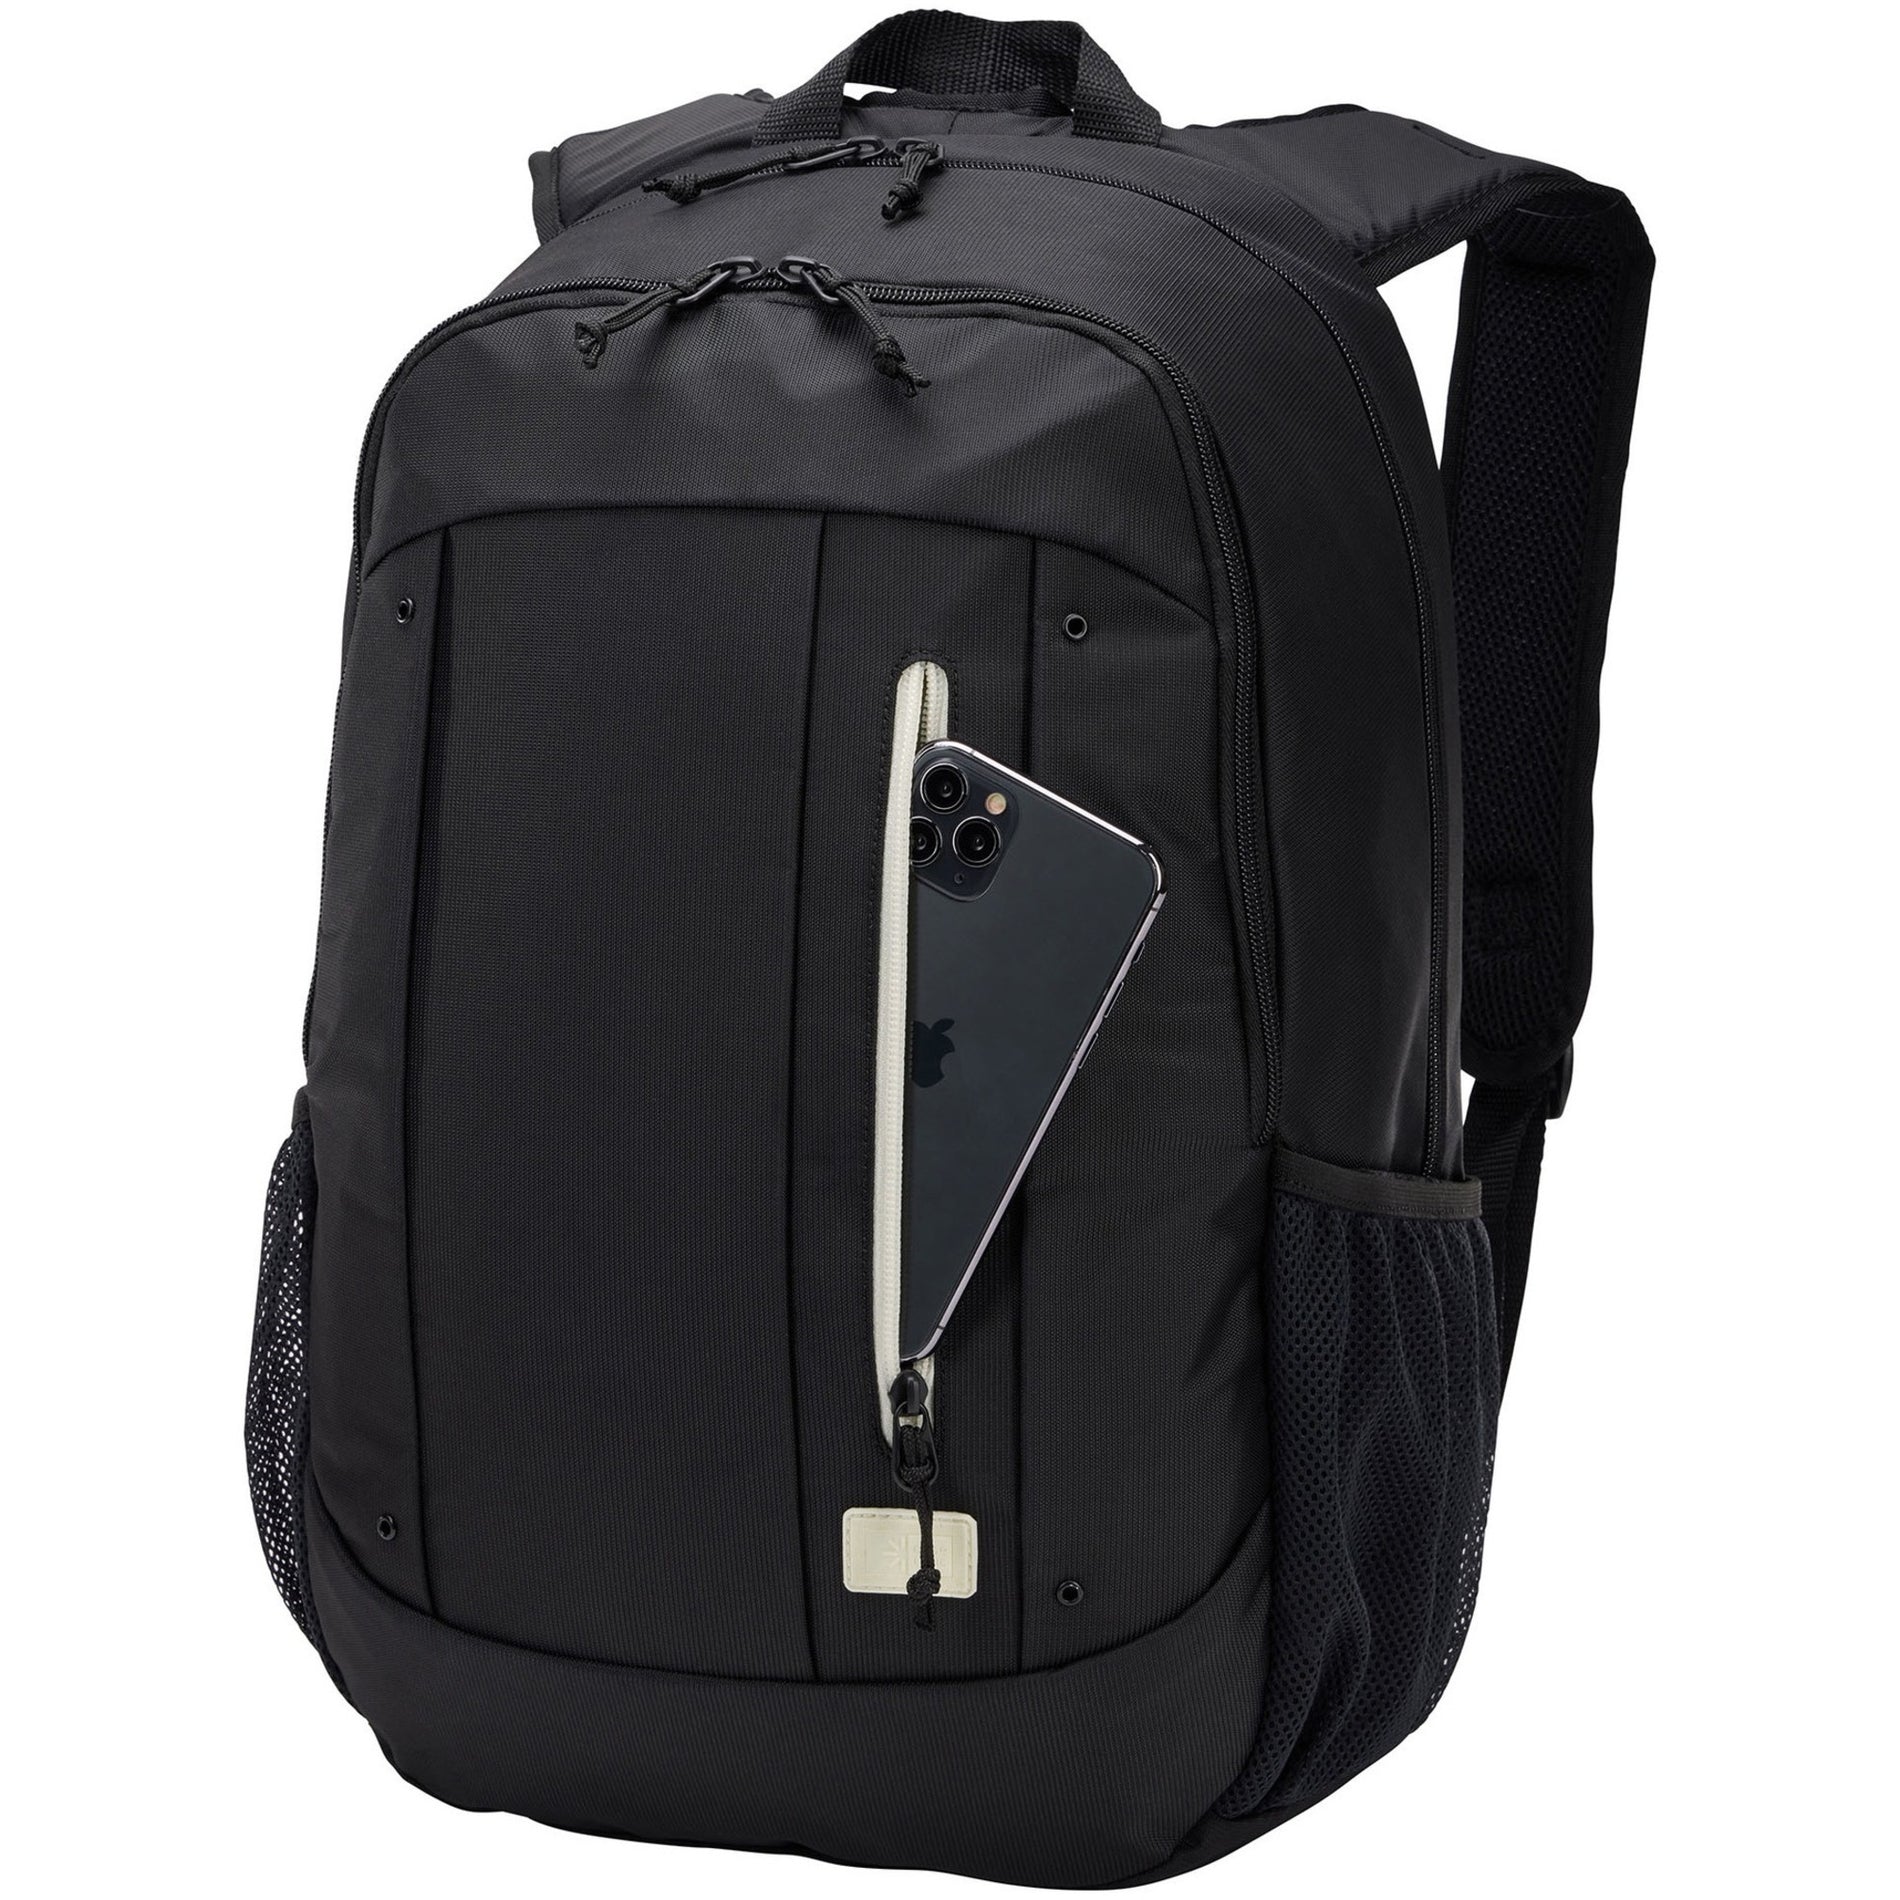 Case Logic 3204869 Jaunt Backpack, Carrying Case for Accessories, Smartphone, Tablet, Notebook